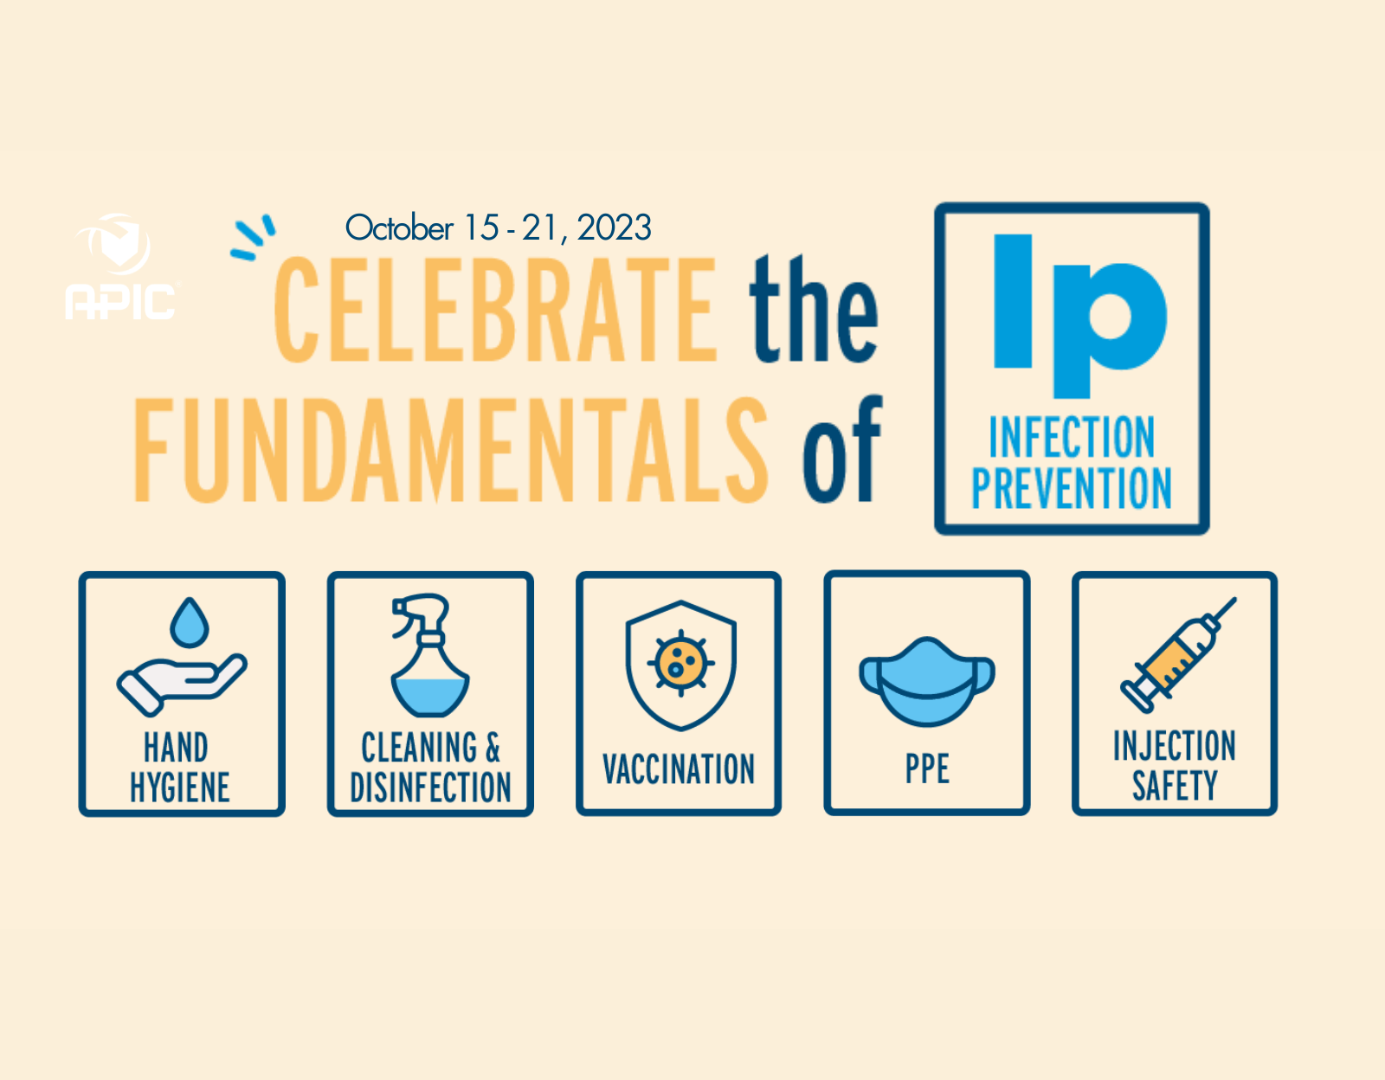 October 15-21, 2023 Celebrate the fundamentals of infection prevention. Symbols for hand hygiene, cleaning & disinfection, vaccination, PPE and injection safety.